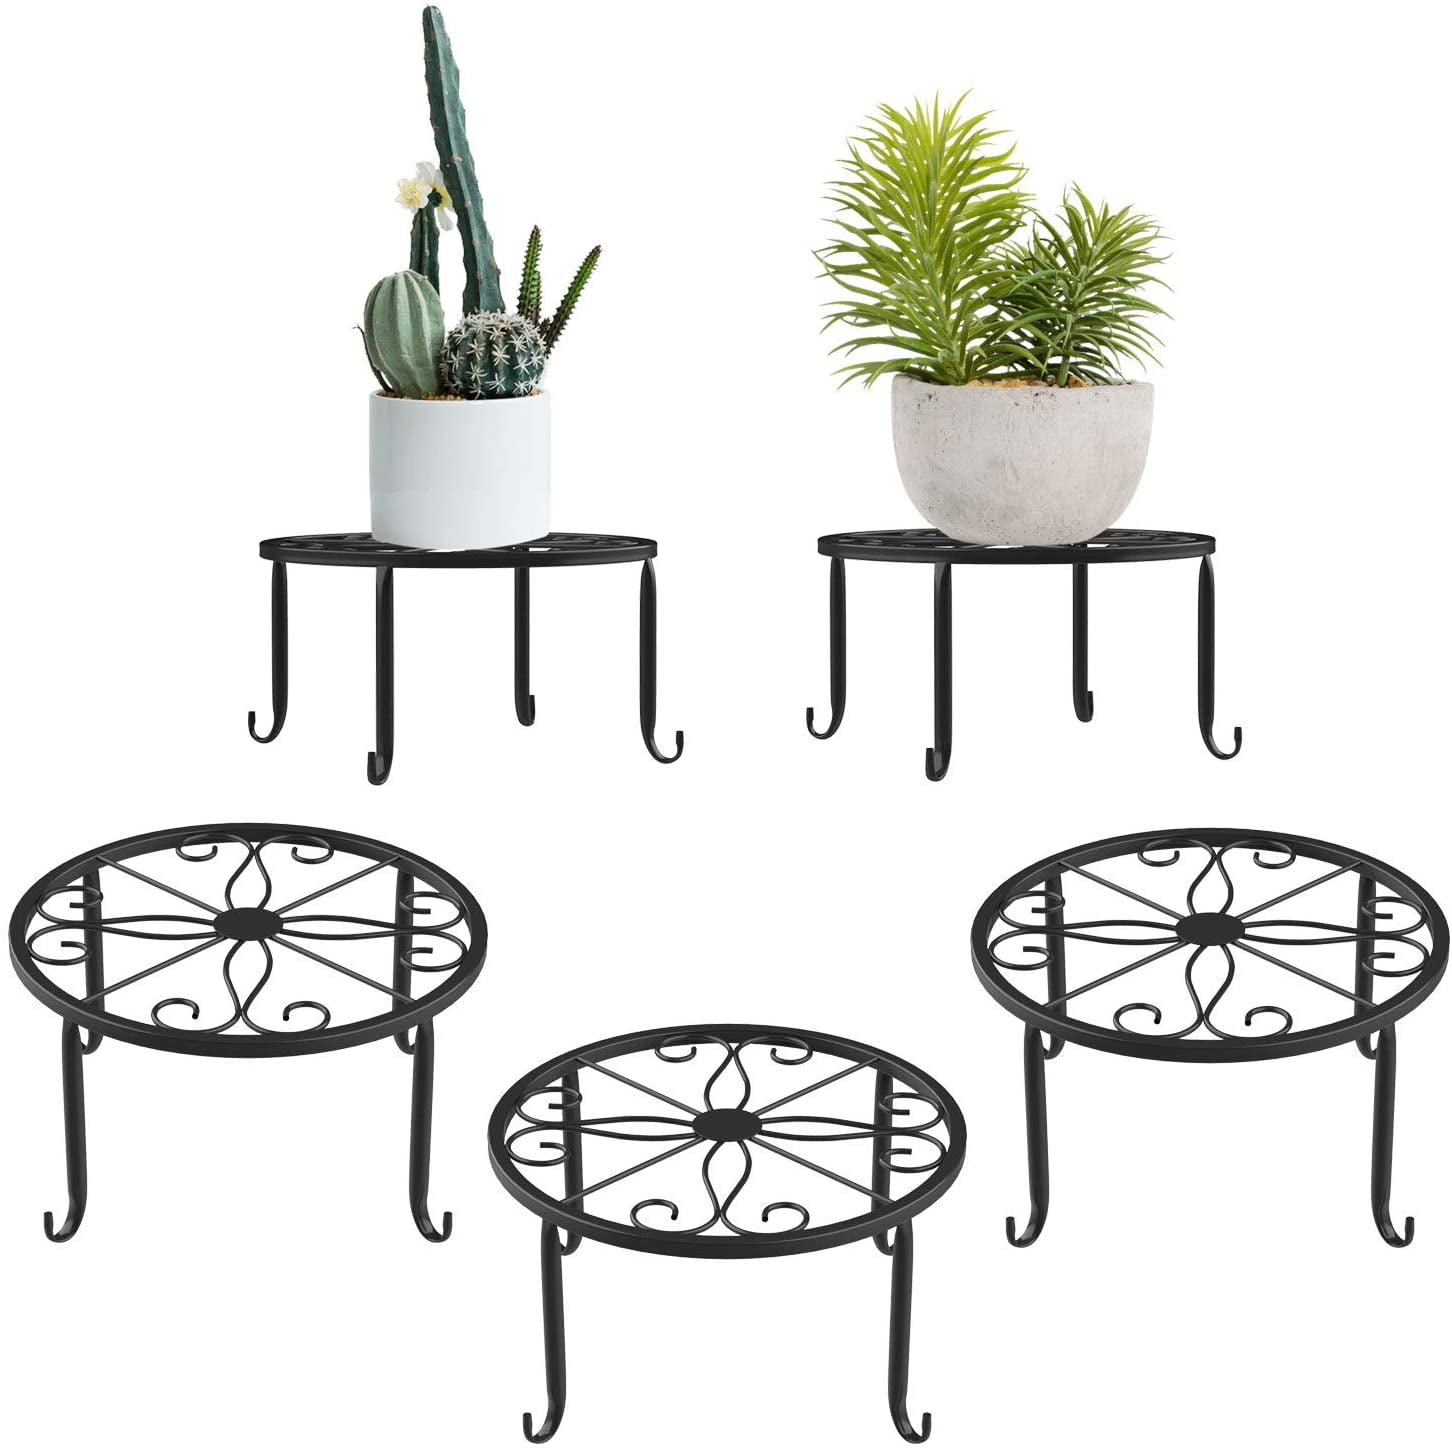 3 Pack Iron Potted Plant Stands Flower Pot Holder 9 inches Heavy Duty 50lb 